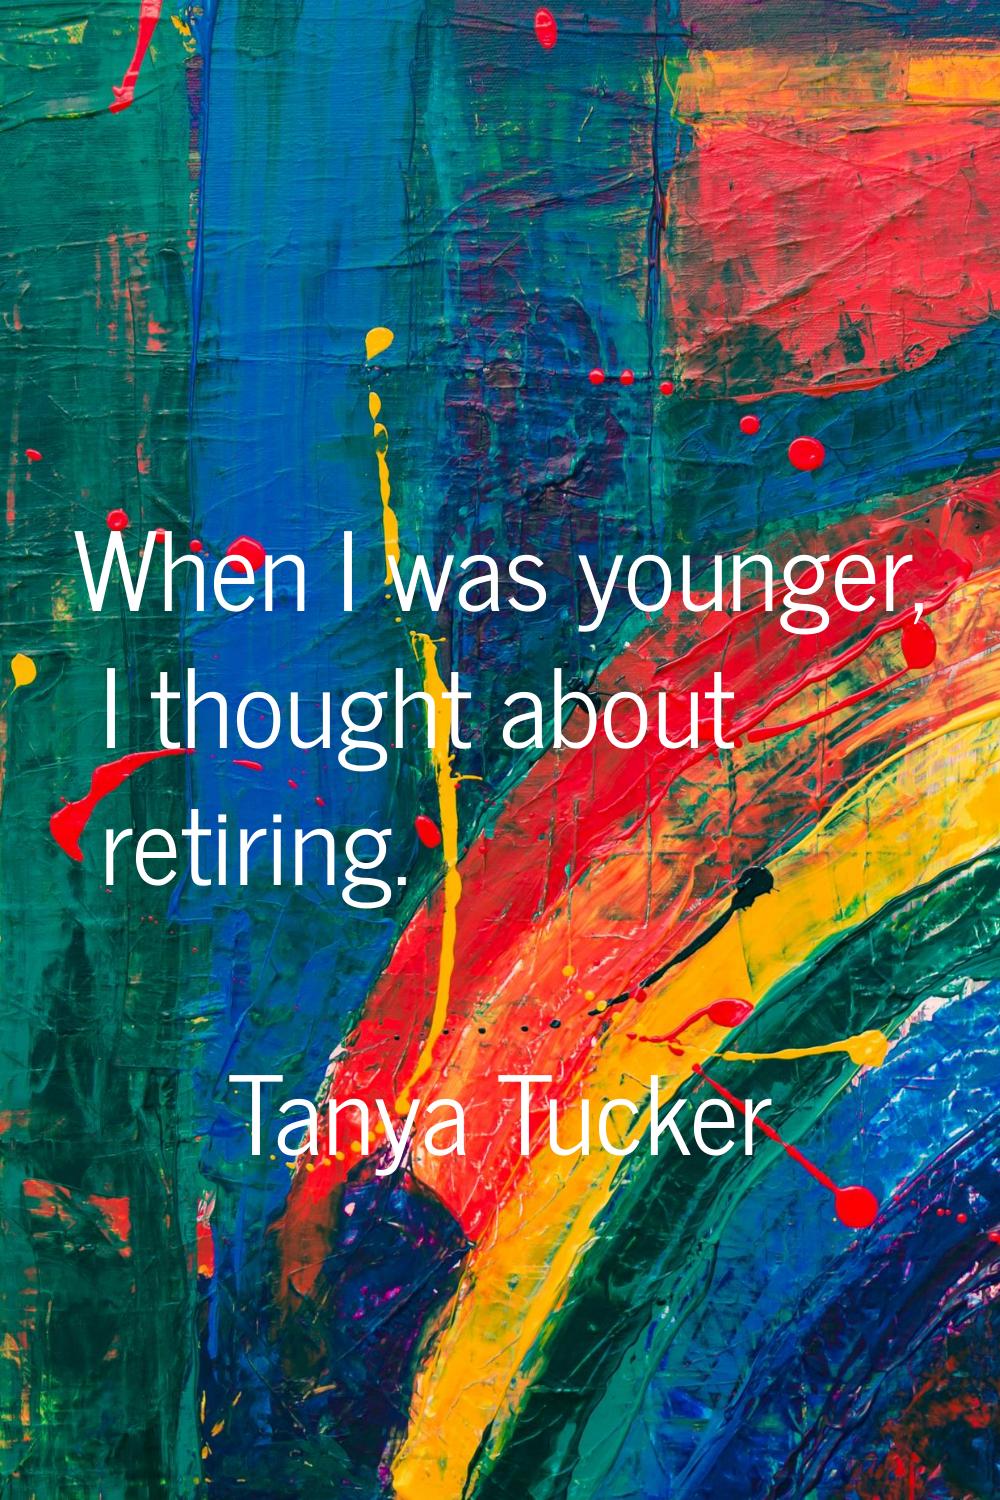 When I was younger, I thought about retiring.